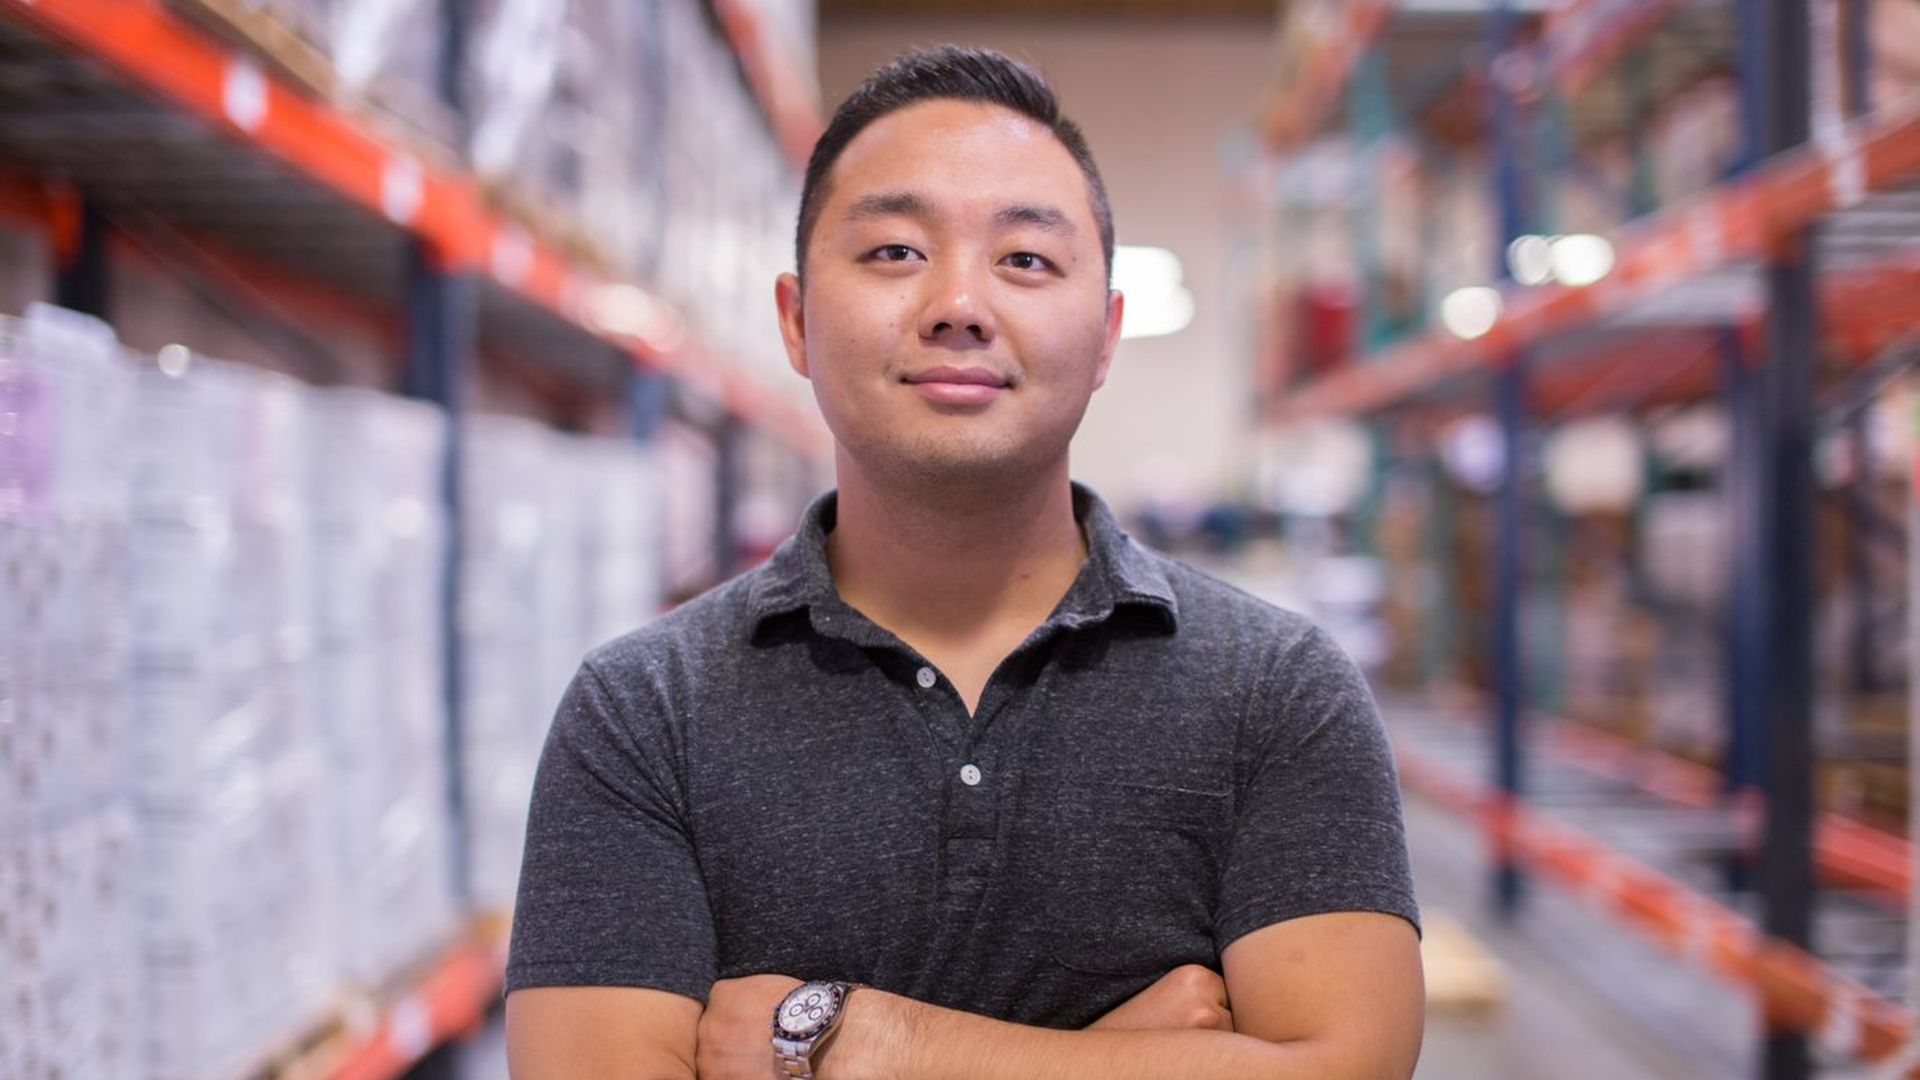 Eugene Kang, the founder of meat snacks brand Country Archer, stands in the middle of his distribution facility with arms crossed wearing a grey polo shirt.